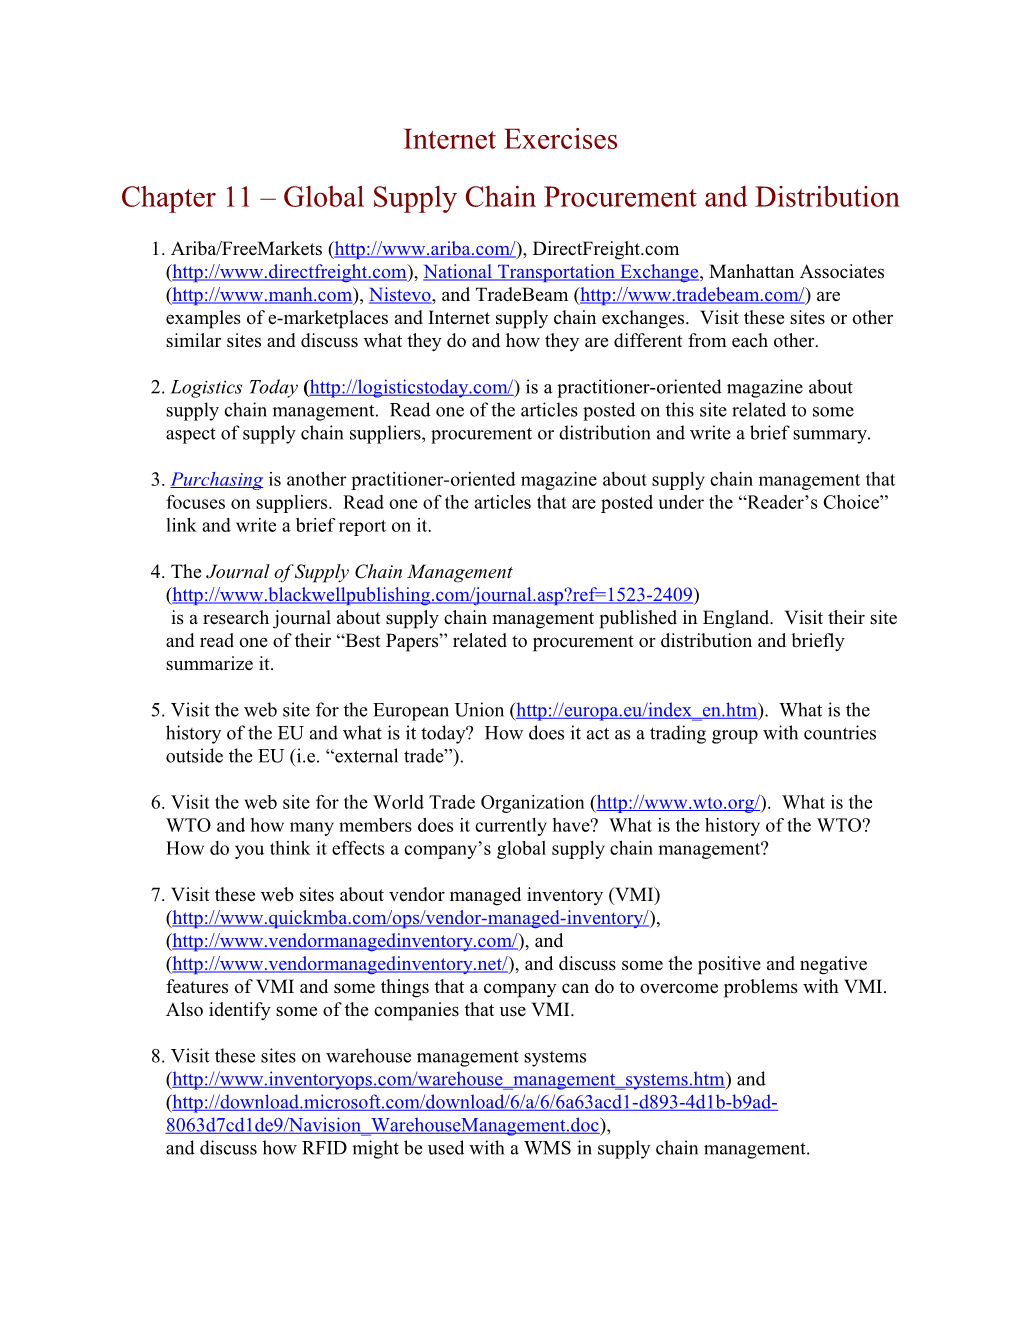 Chapter 11 Global Supply Chain Procurement and Distribution